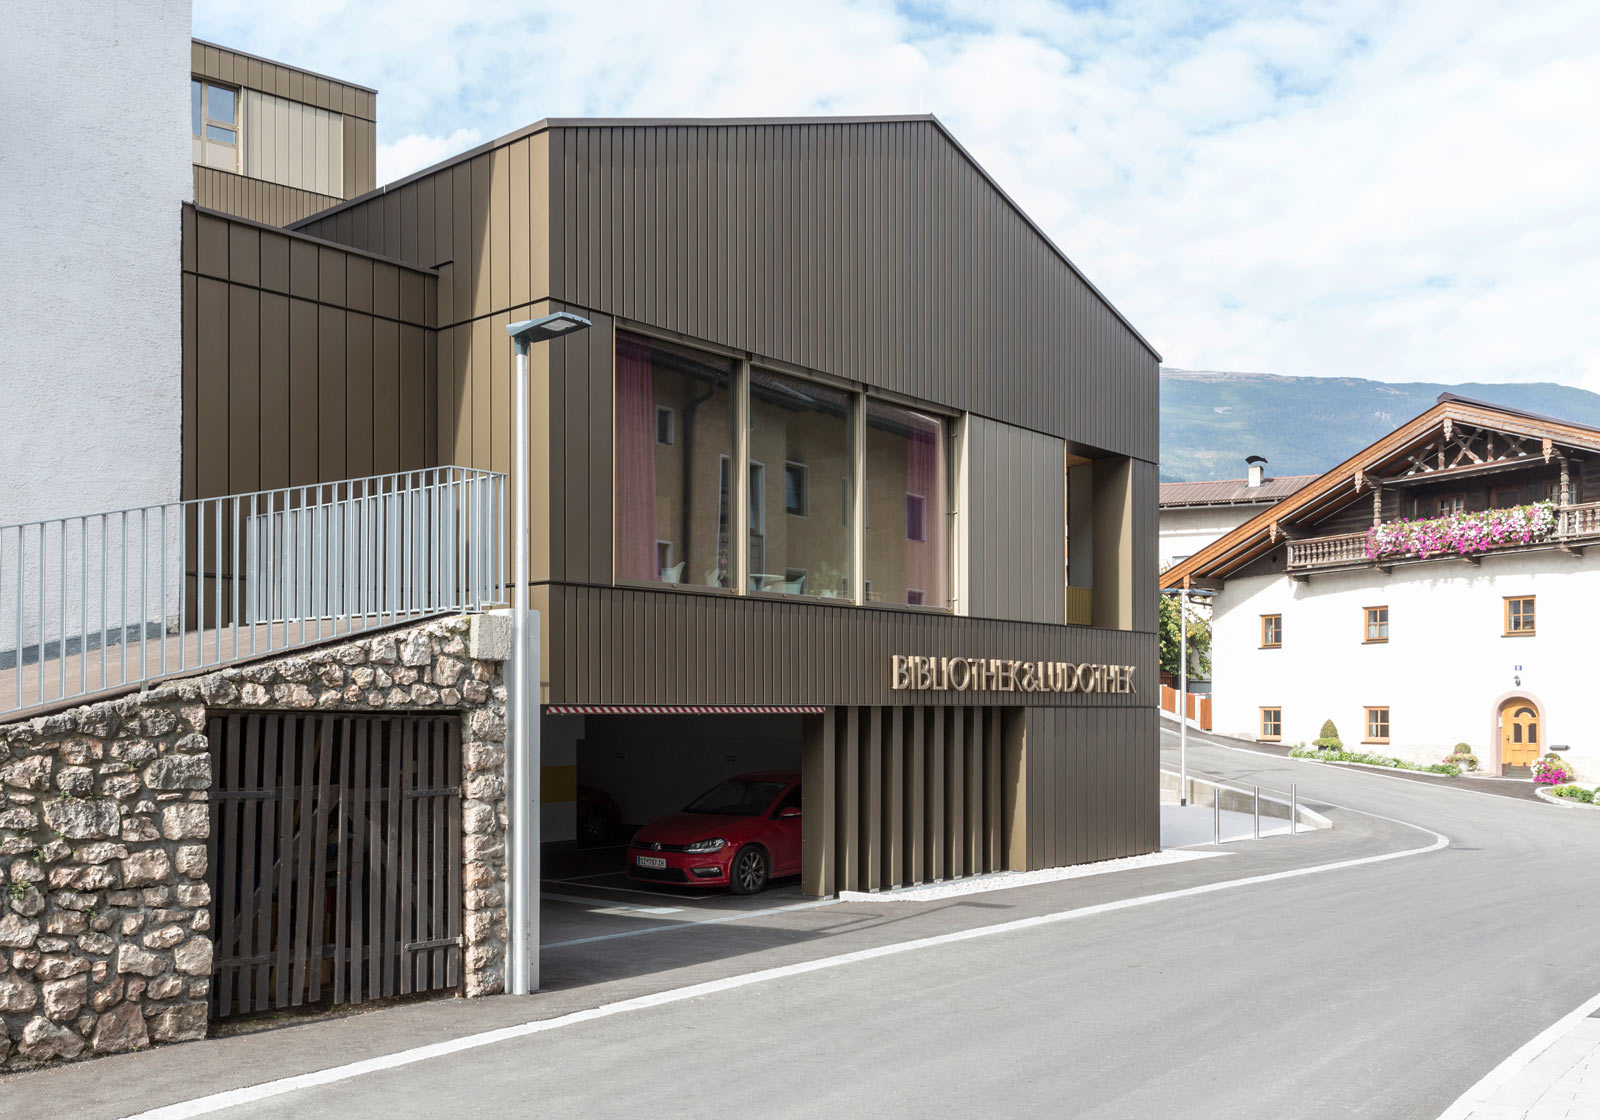 The new municipal offices slip smoothly into the traditional village structure. Photo: ATP/Rauschmeir